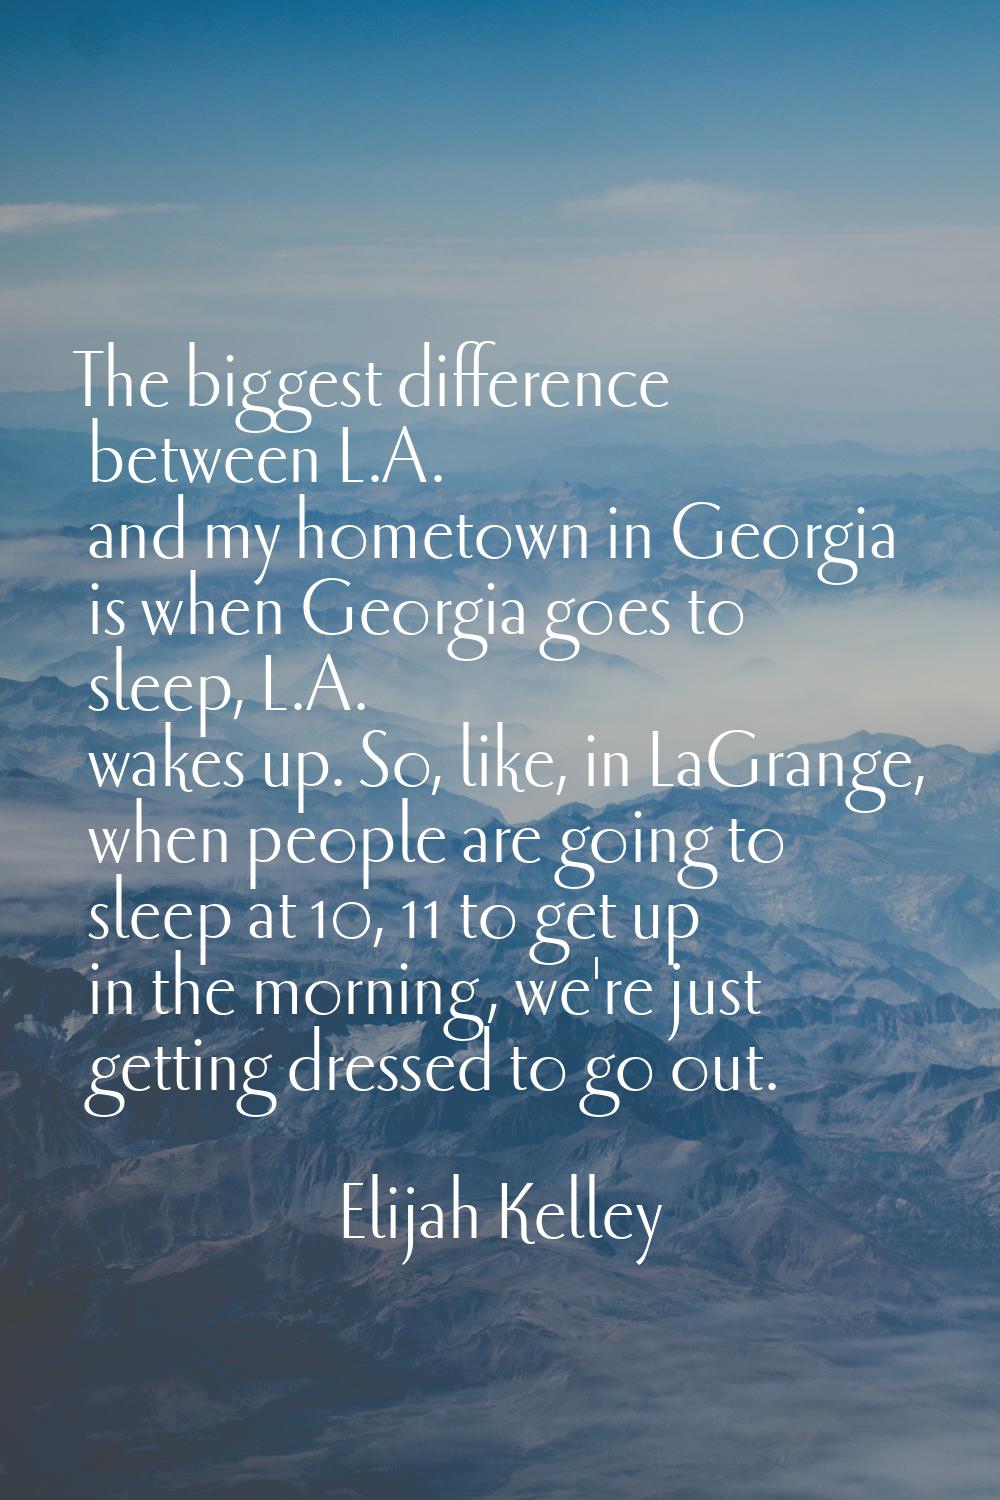 The biggest difference between L.A. and my hometown in Georgia is when Georgia goes to sleep, L.A. 